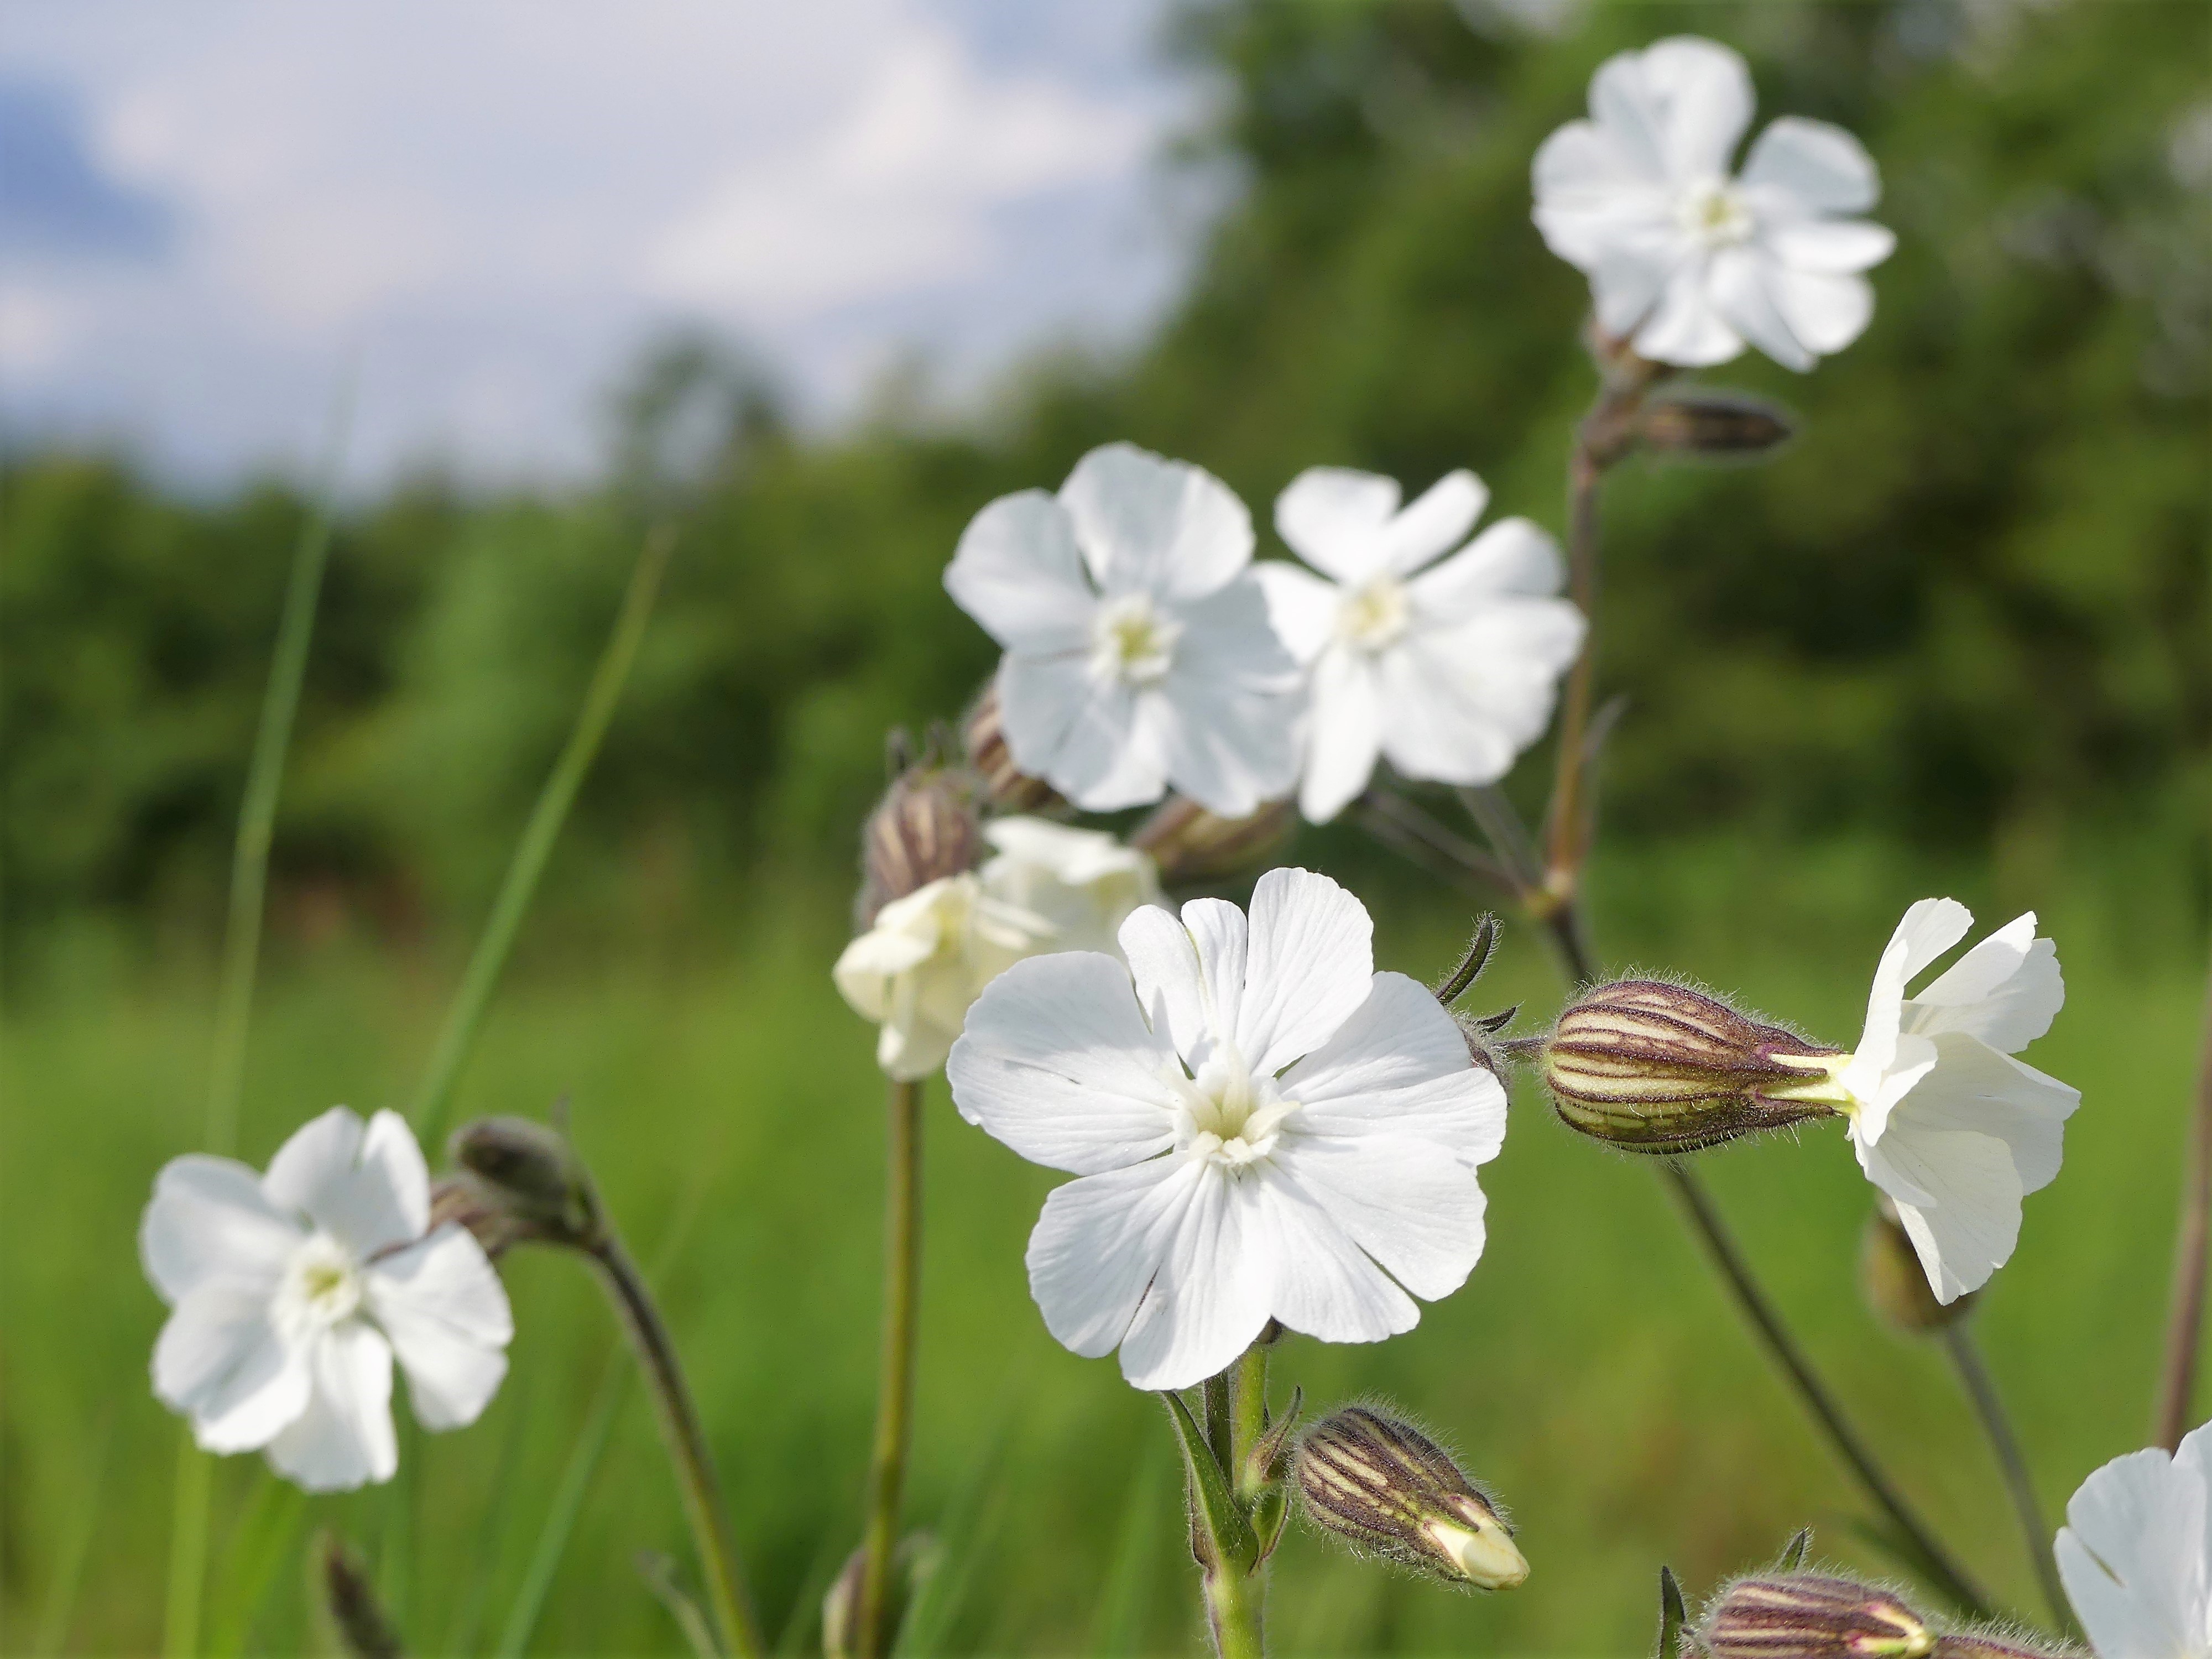 White campion is one of the increasingly rare plants which could benefit from less mowing (Peter Fleming)